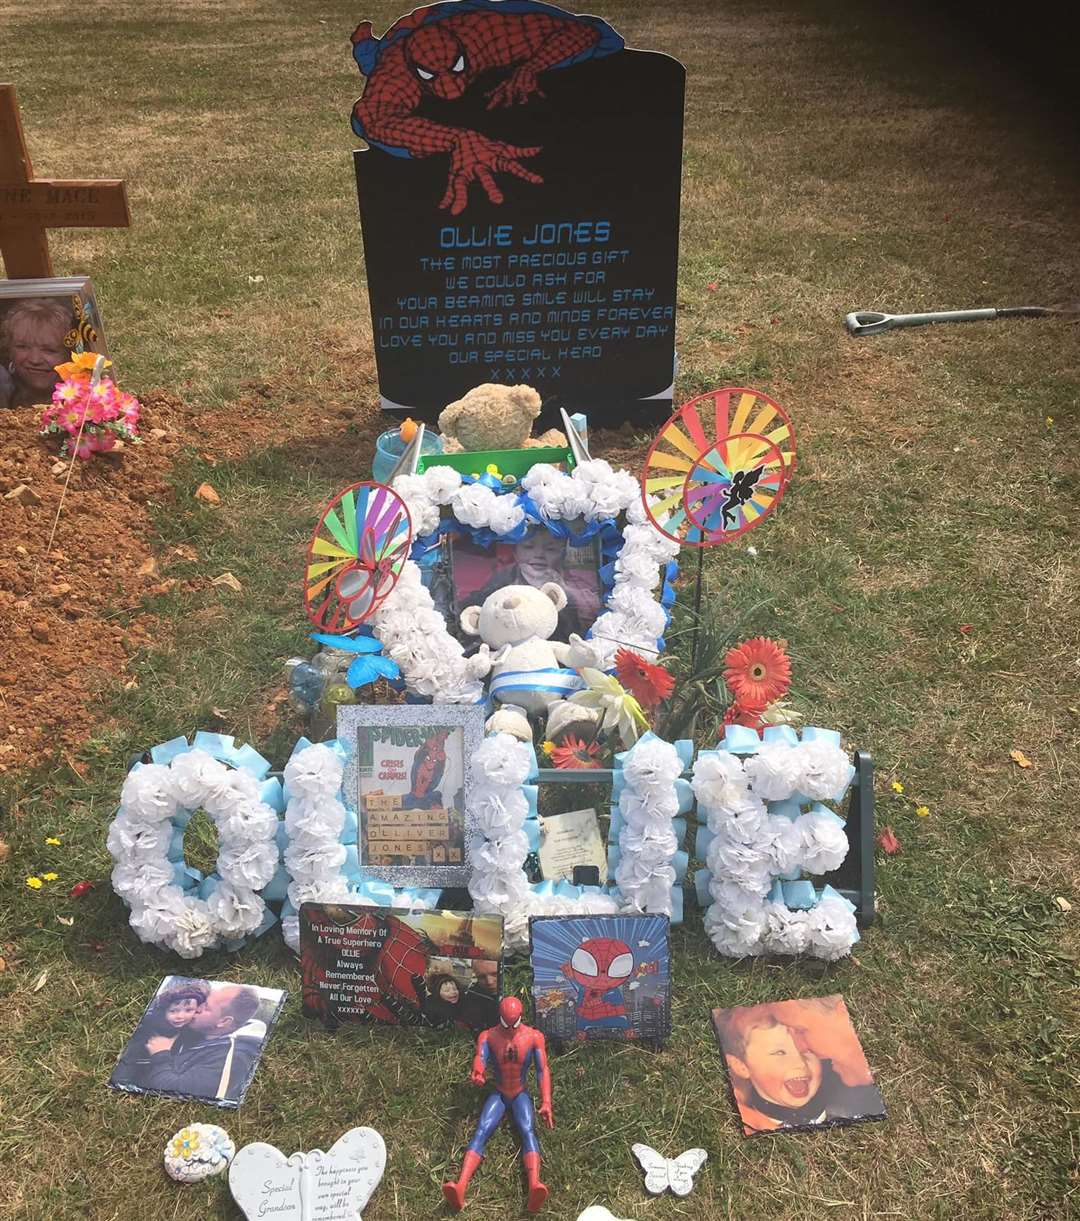 Lloyd Jones put up a temporary Spider-Man marker at his son Ollie's grave in Maidstone